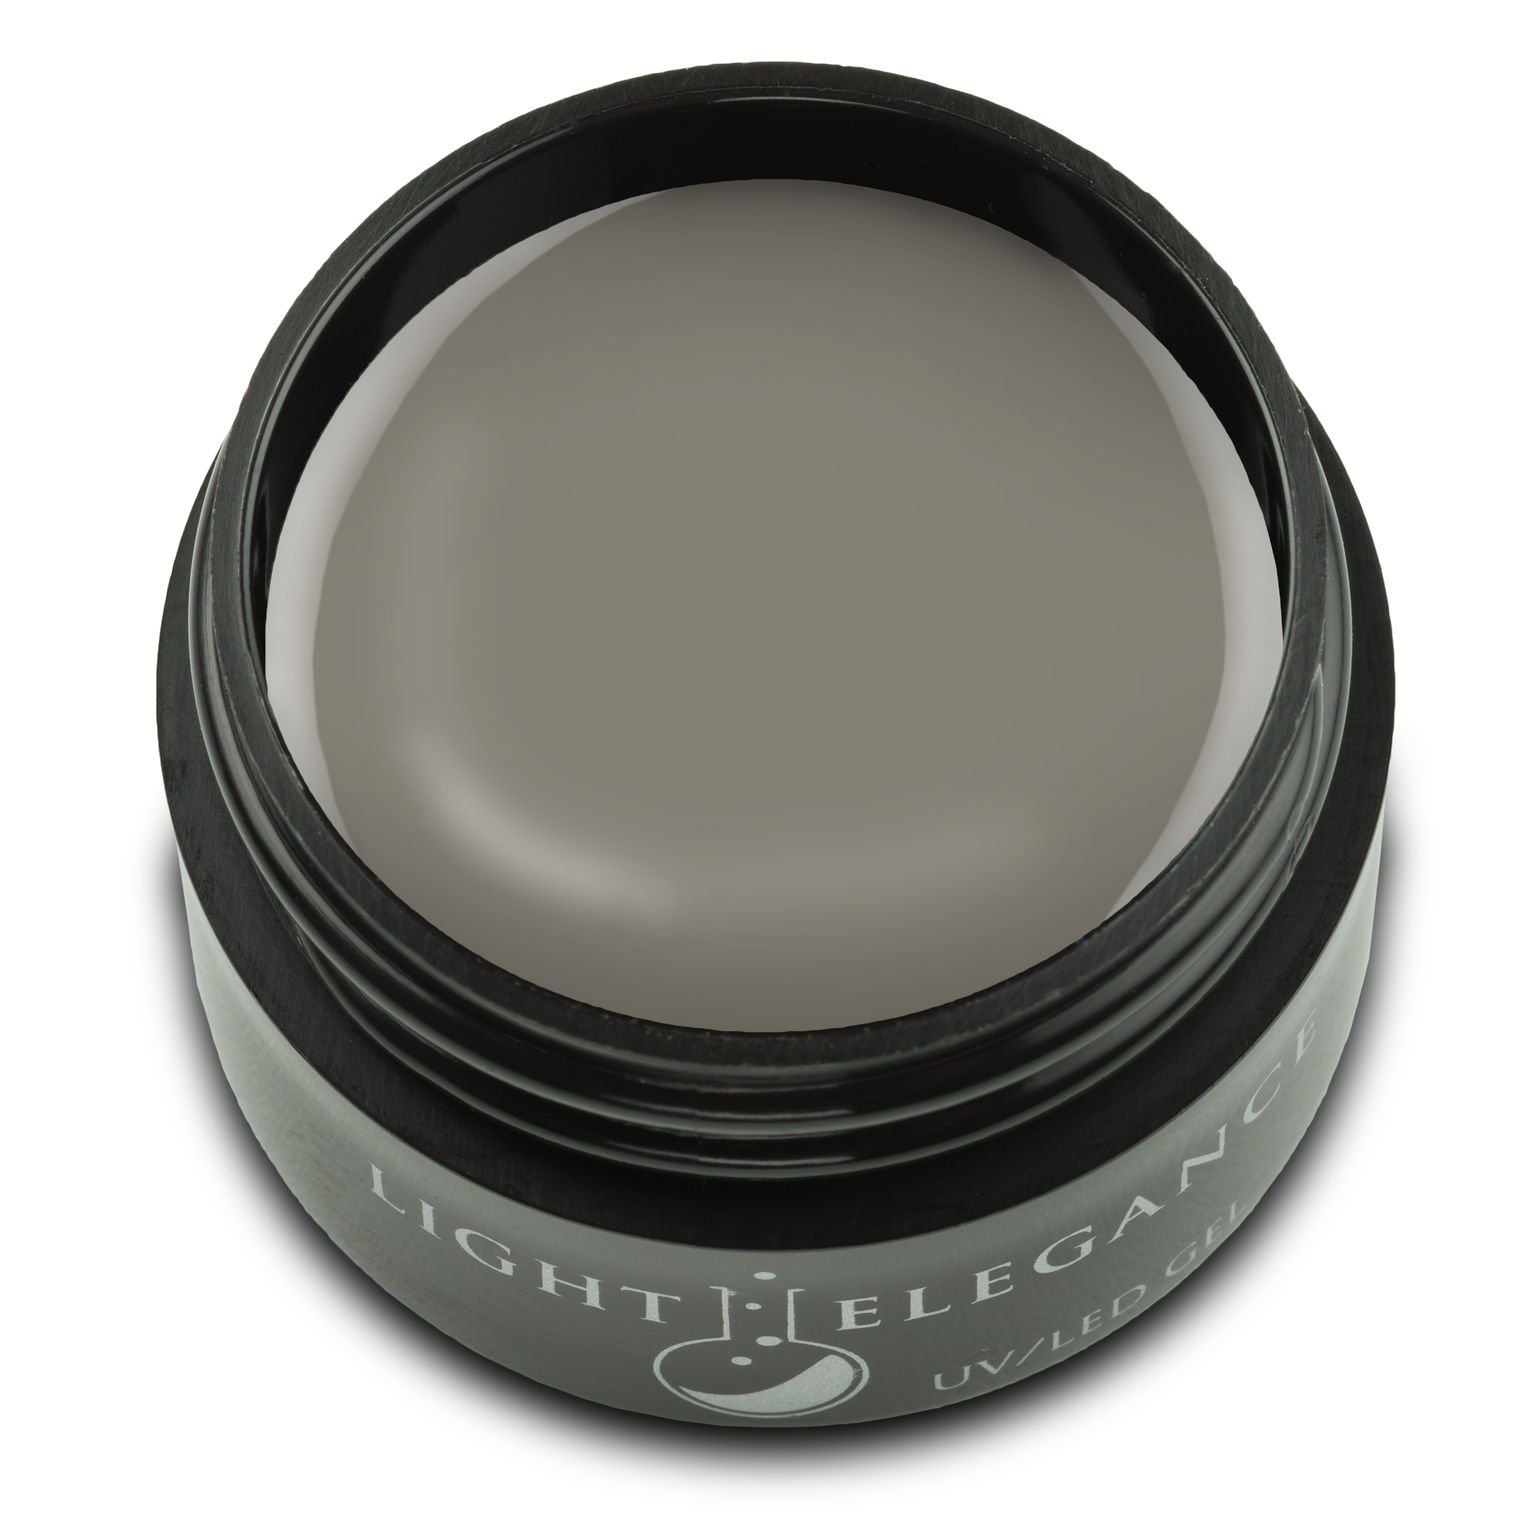 Light Elegance Color Gel - Khakis and Cameras - Creata Beauty - Professional Beauty Products